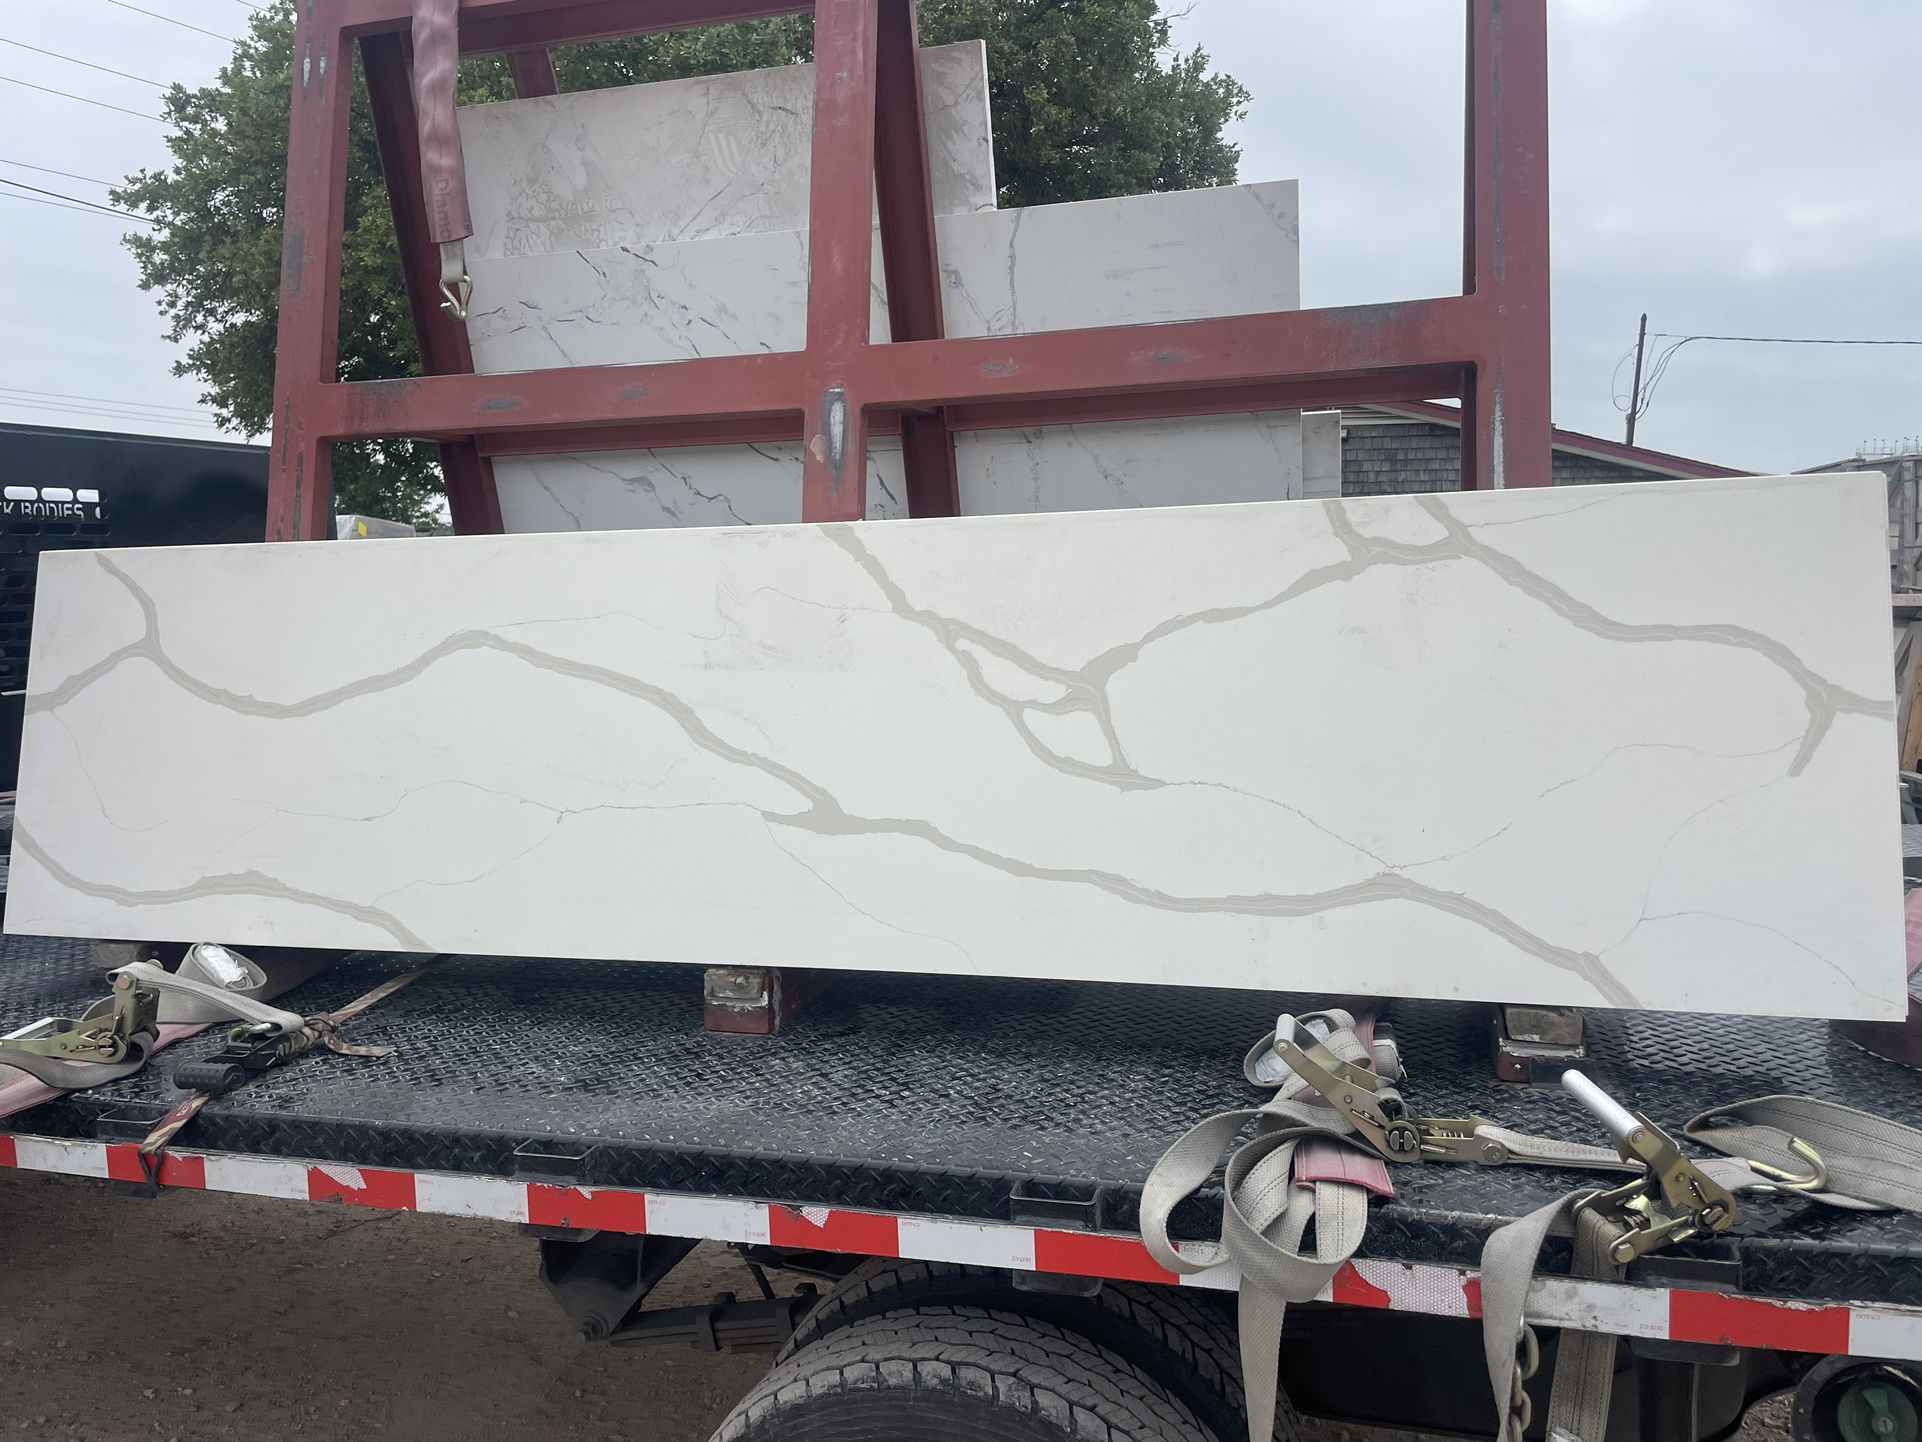 Big sale 🔥🔥👍quartz slabs prefabricated Calacatta gold and several  other colors 110”x25.5”””  starting at $190 to $350 per slab  3cm,awesome deals 